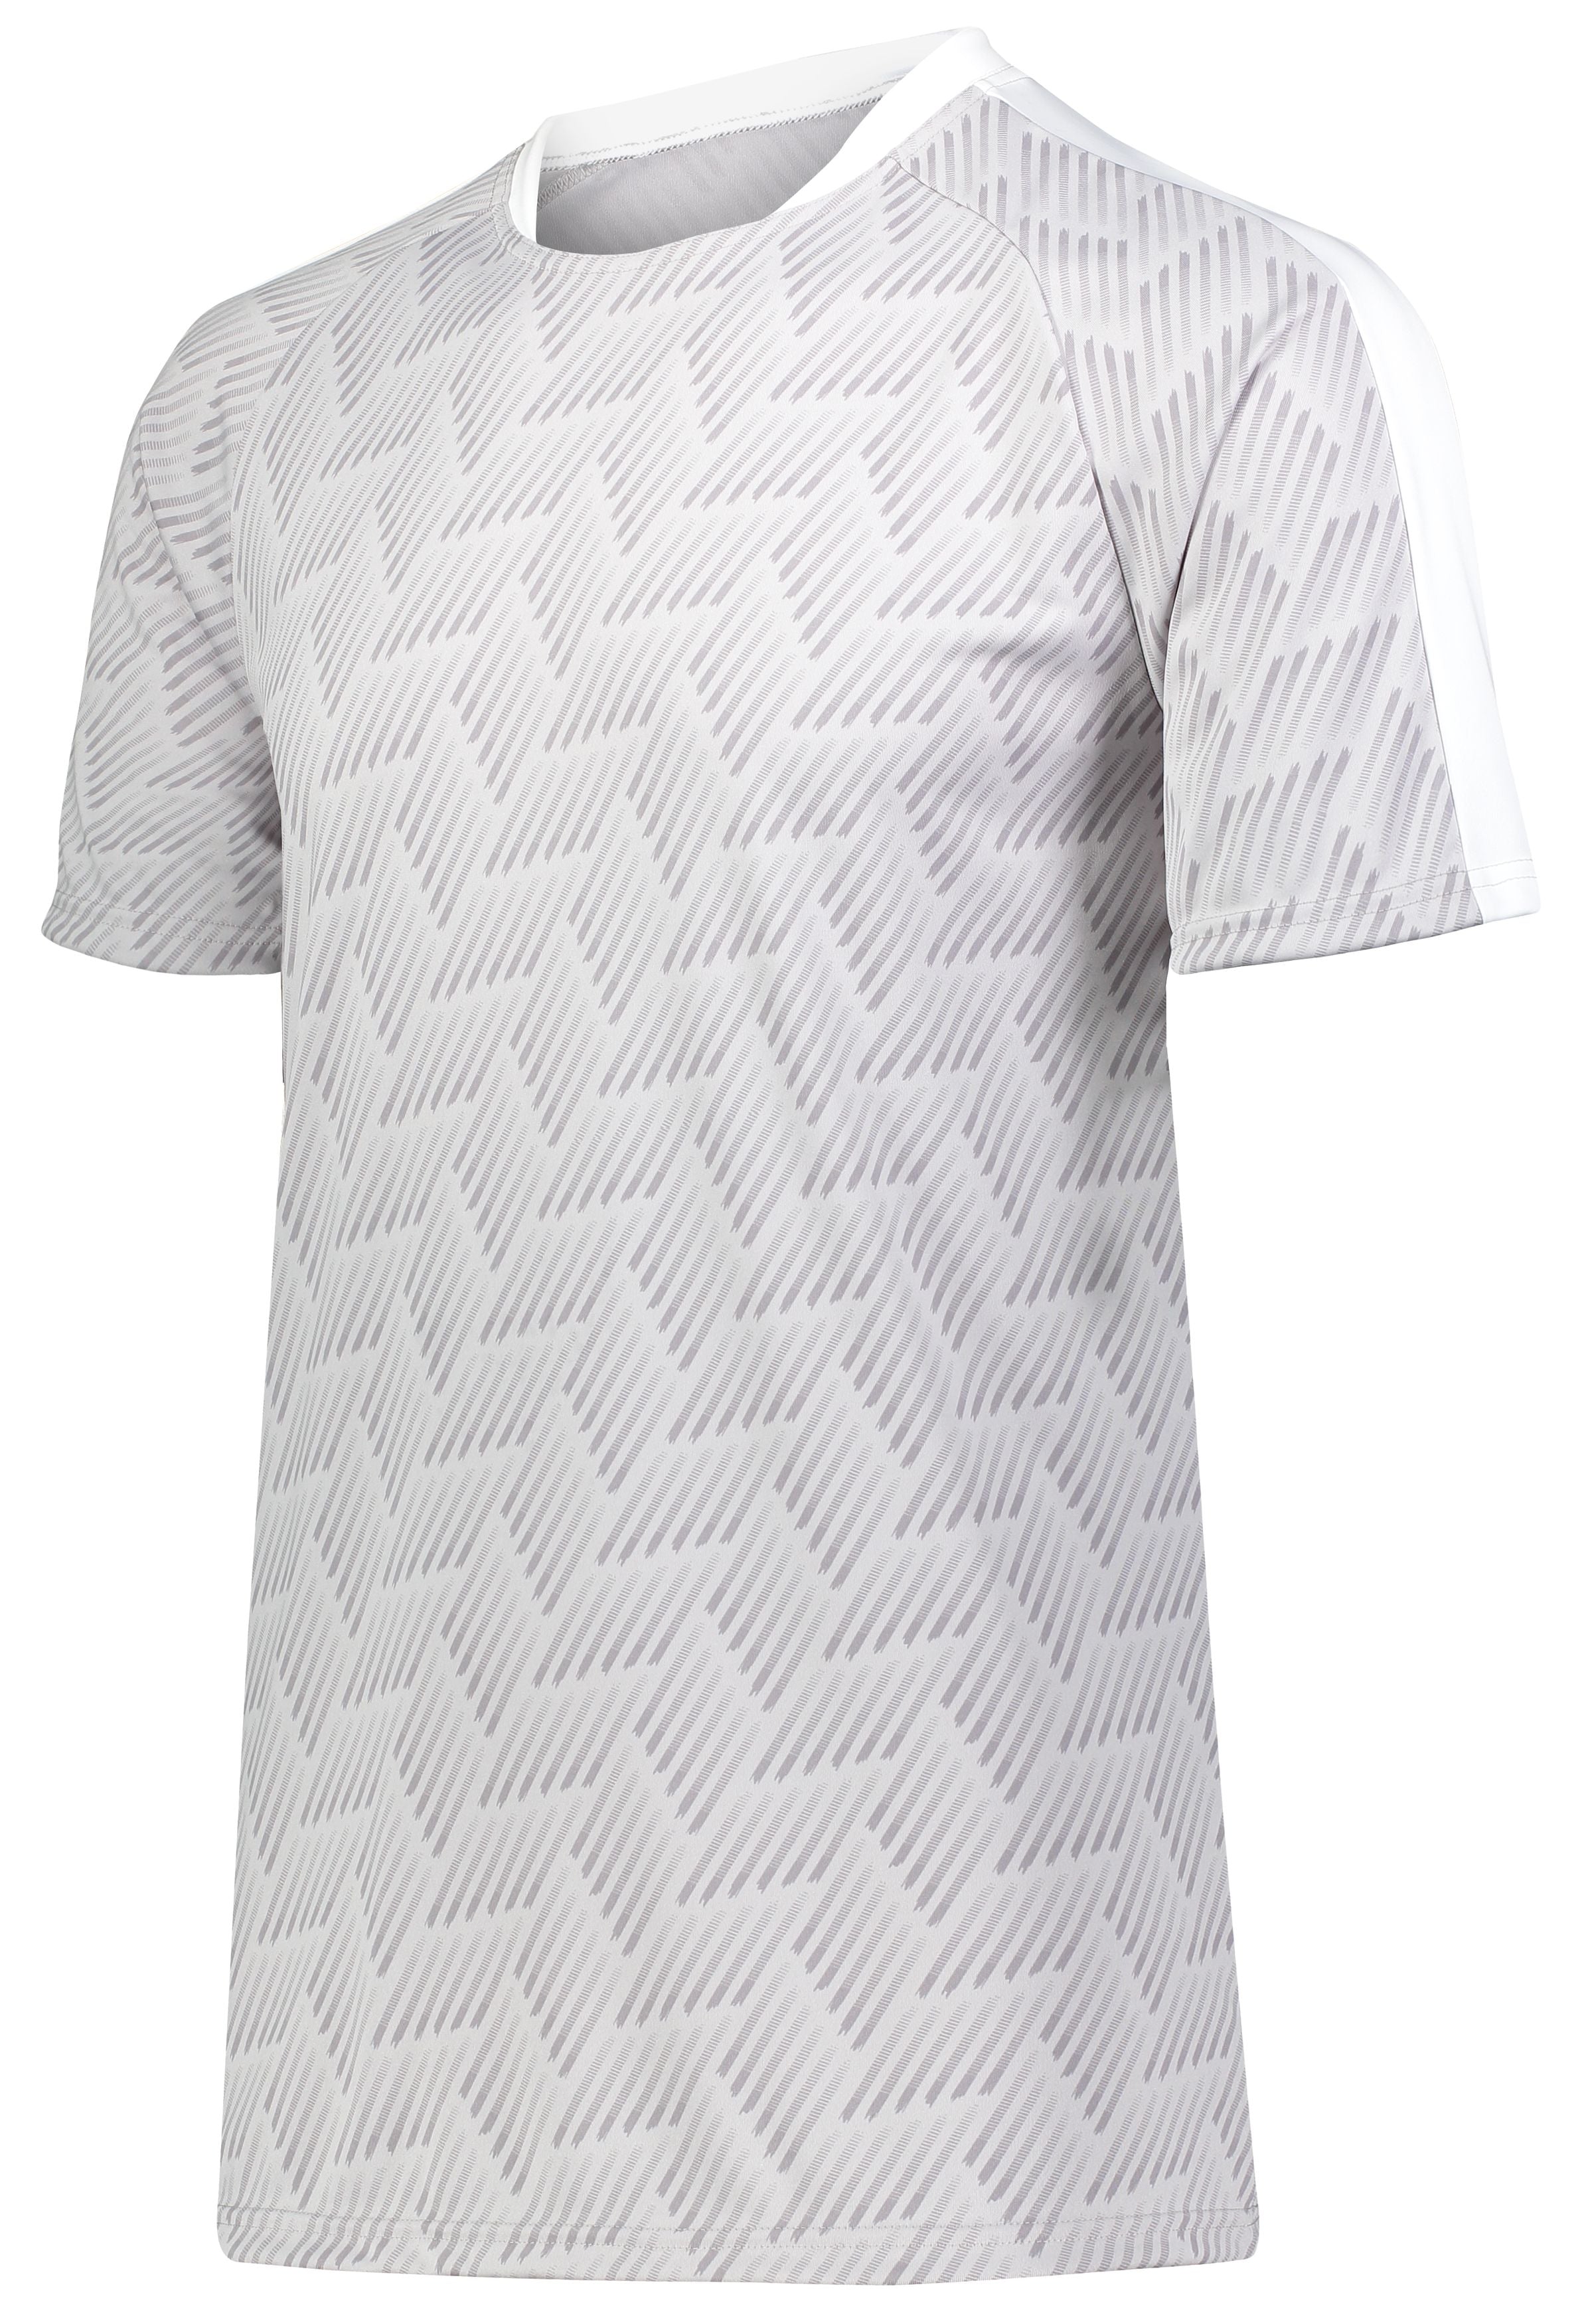 High 5 Youth Hypervolt Jersey in Graphite Print/White  -Part of the Youth, Youth-Jersey, High5-Products, Soccer, Shirts, All-Sports-1 product lines at KanaleyCreations.com